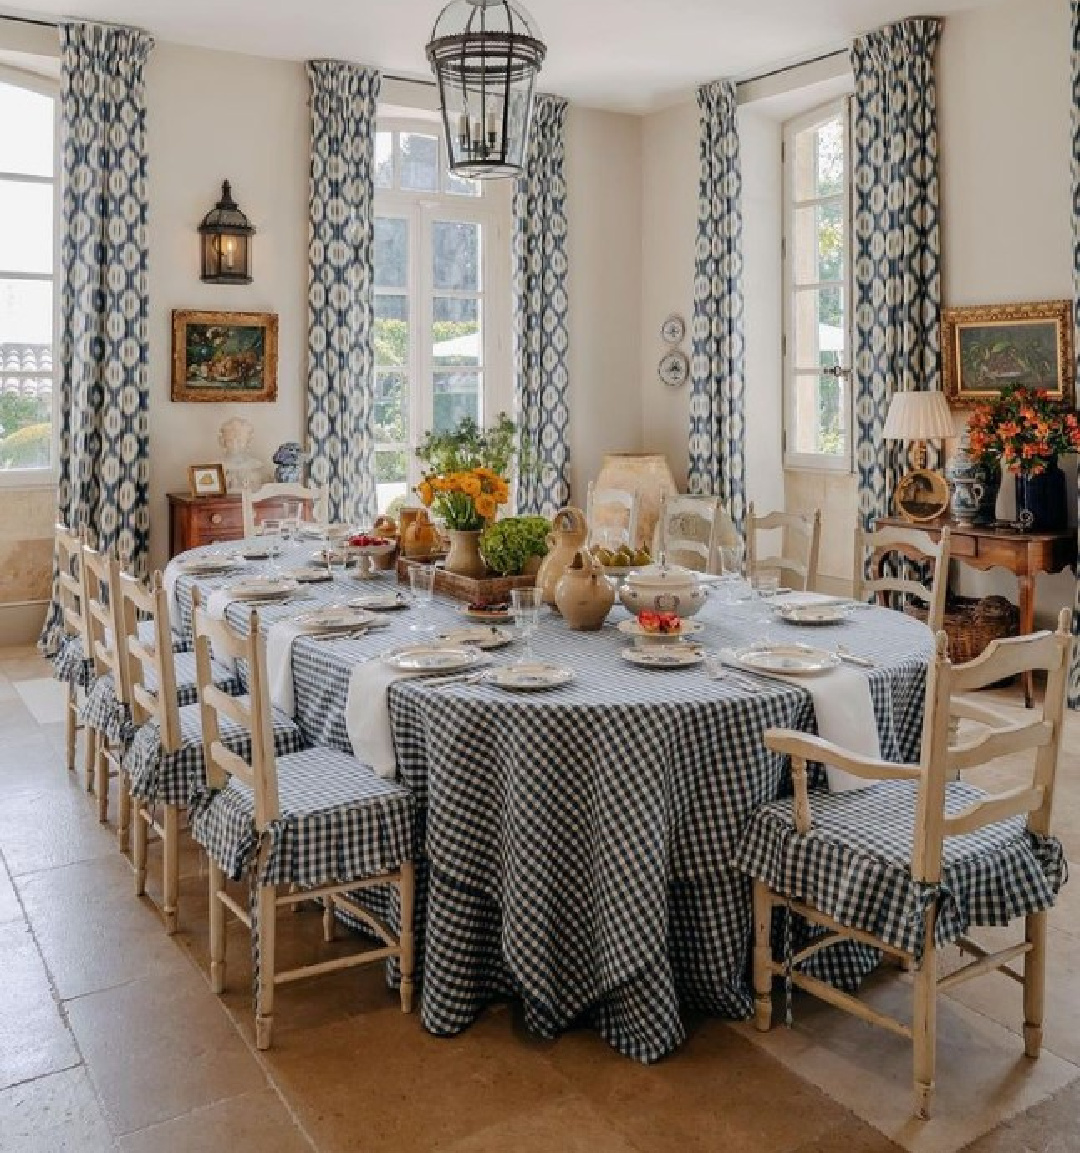 French country dining room with blue and white checks - inside Le Mas des Poiriers, a Rhone Valley renovated farmhouse. @provencepoiriers photo: @angelinalzi